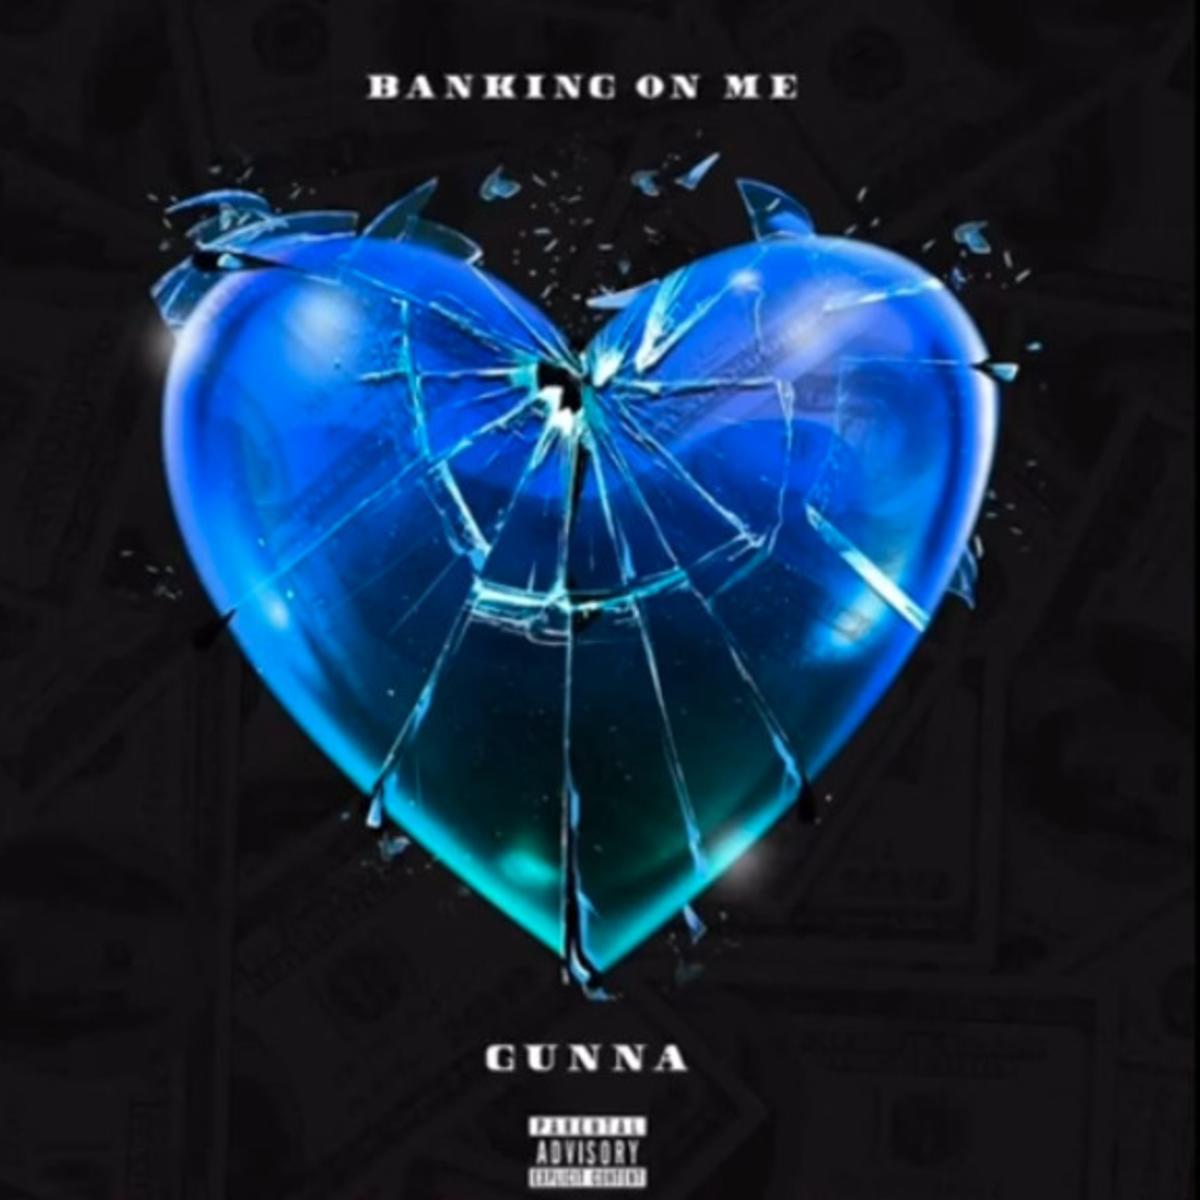 Gunna Pays Homage To His Woman In “Banking On Me”